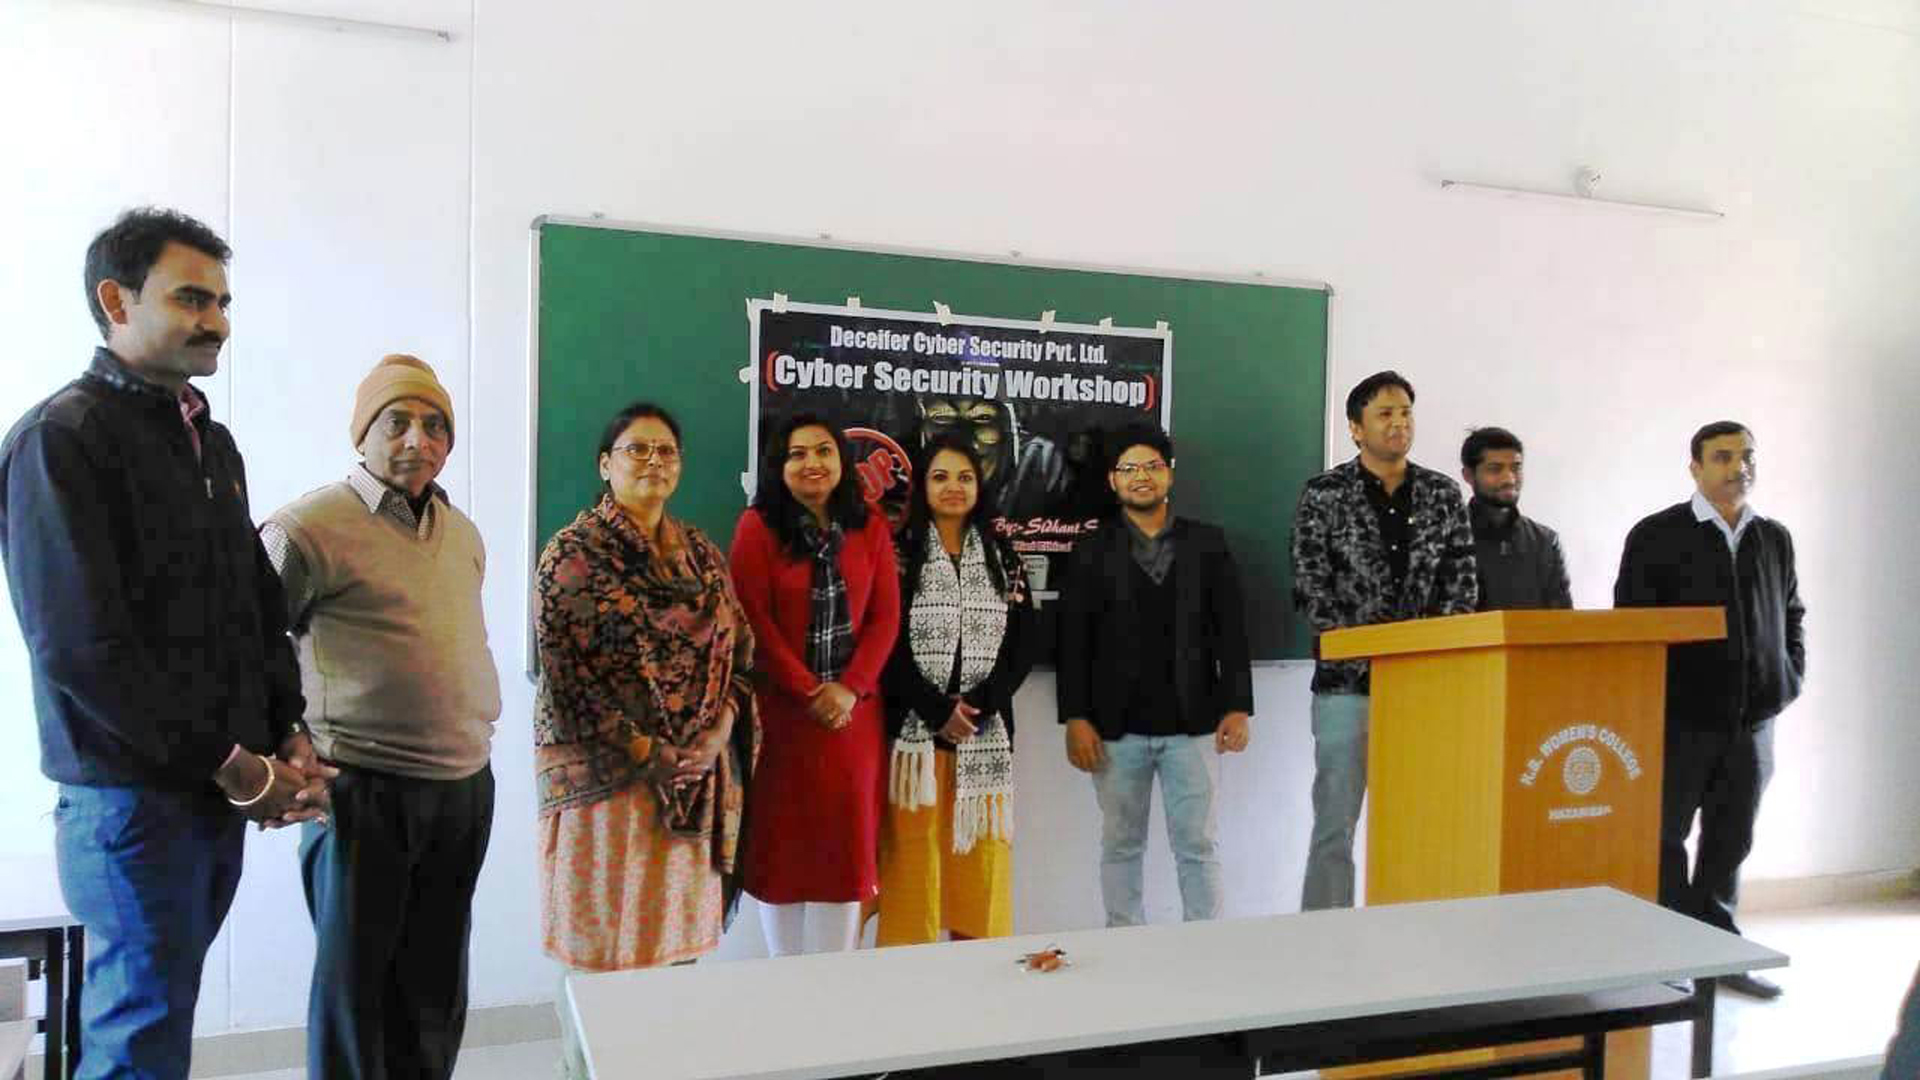 Cyber Security Workshop at Jan 2019 for Women's Security